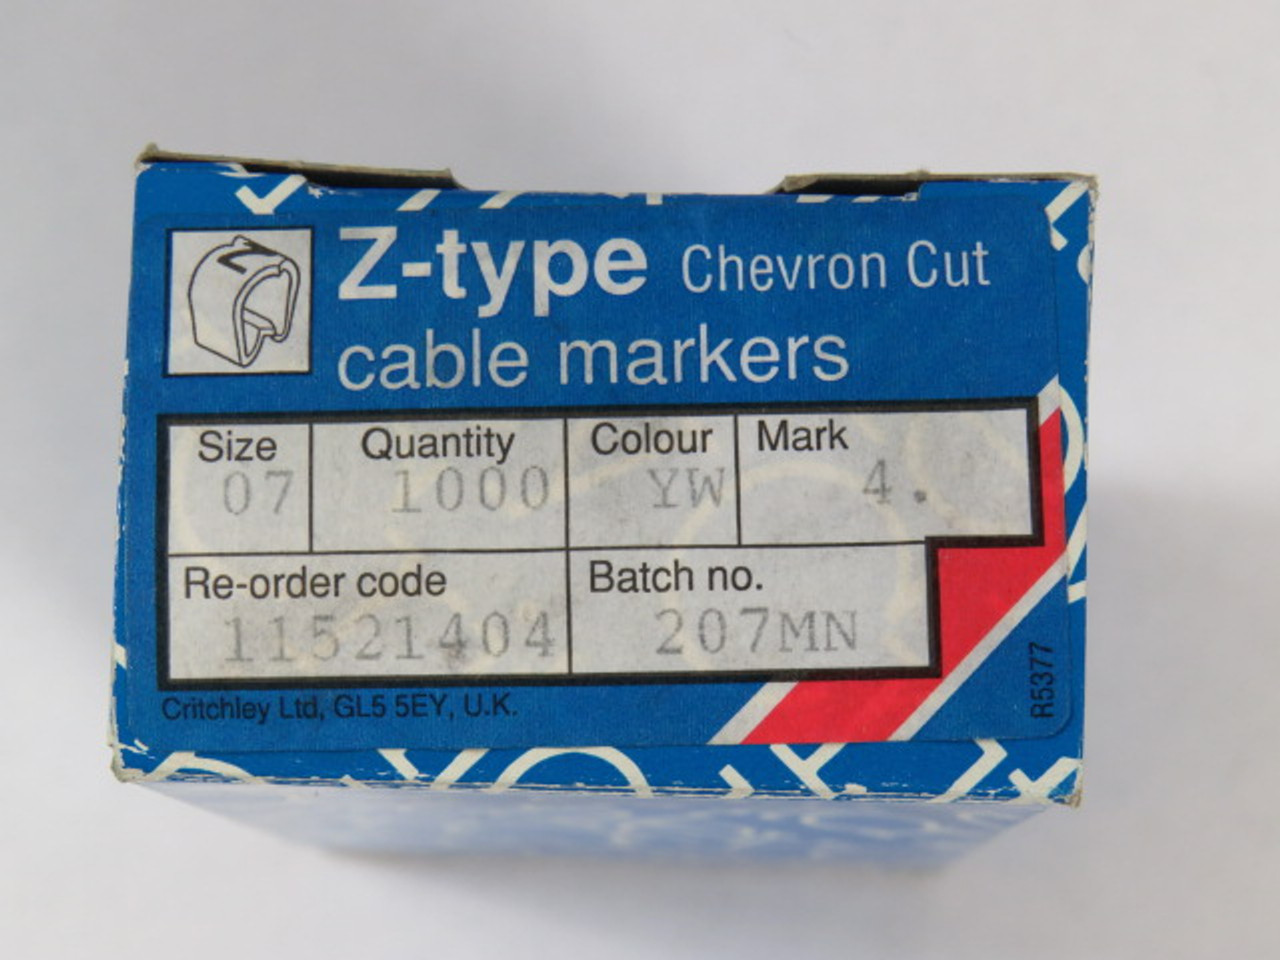 Critchley 11521404 Yellow Cable Marker #4 Z7 Chevron Cut 900-Pack ! NEW !